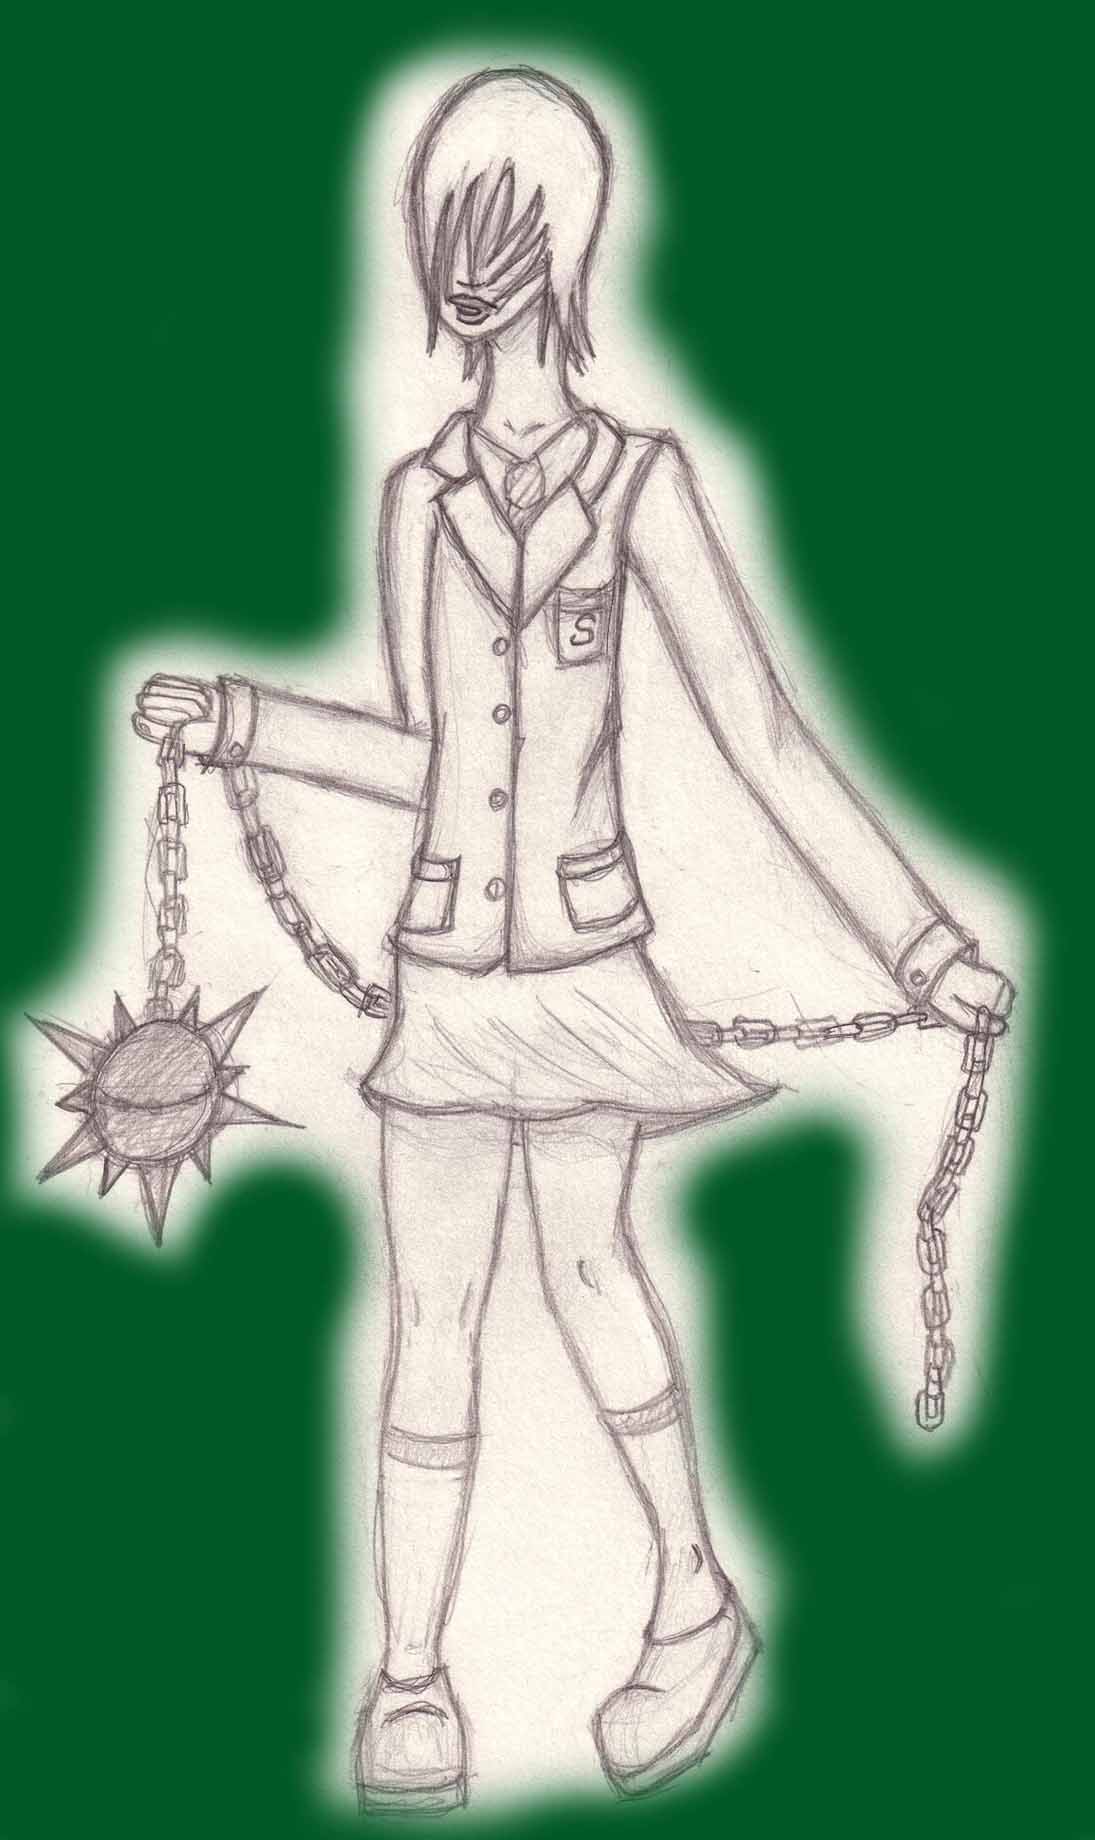 Draco the school girl by Cookie